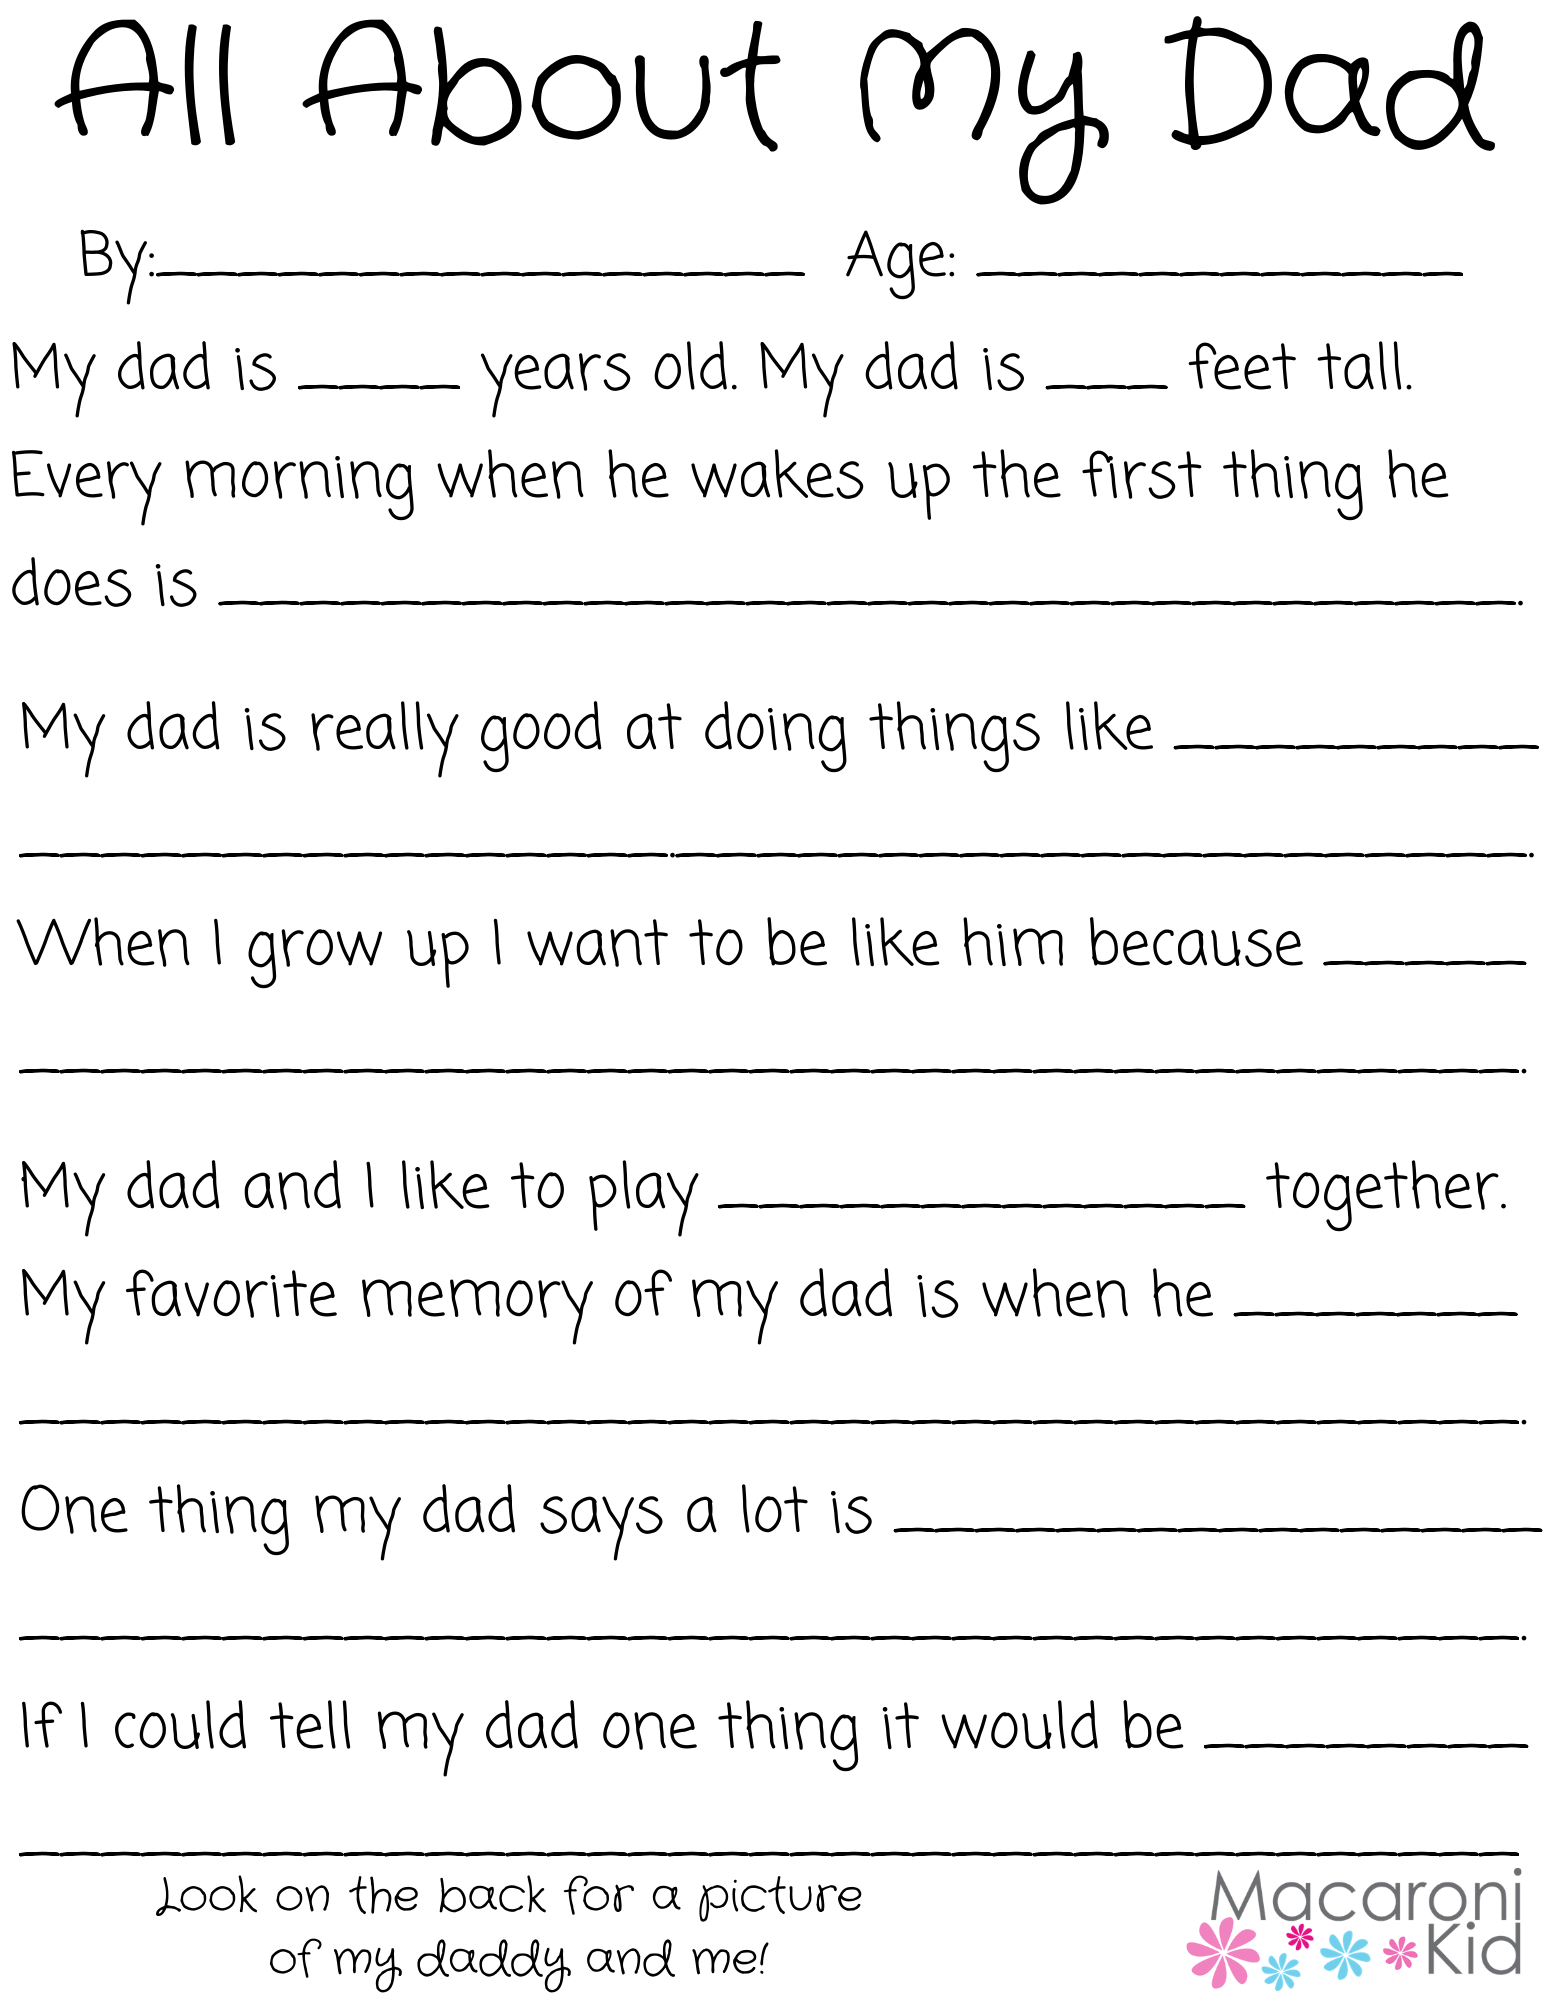 All About My Dad A Father s Day Questionnaire And Free Printable 